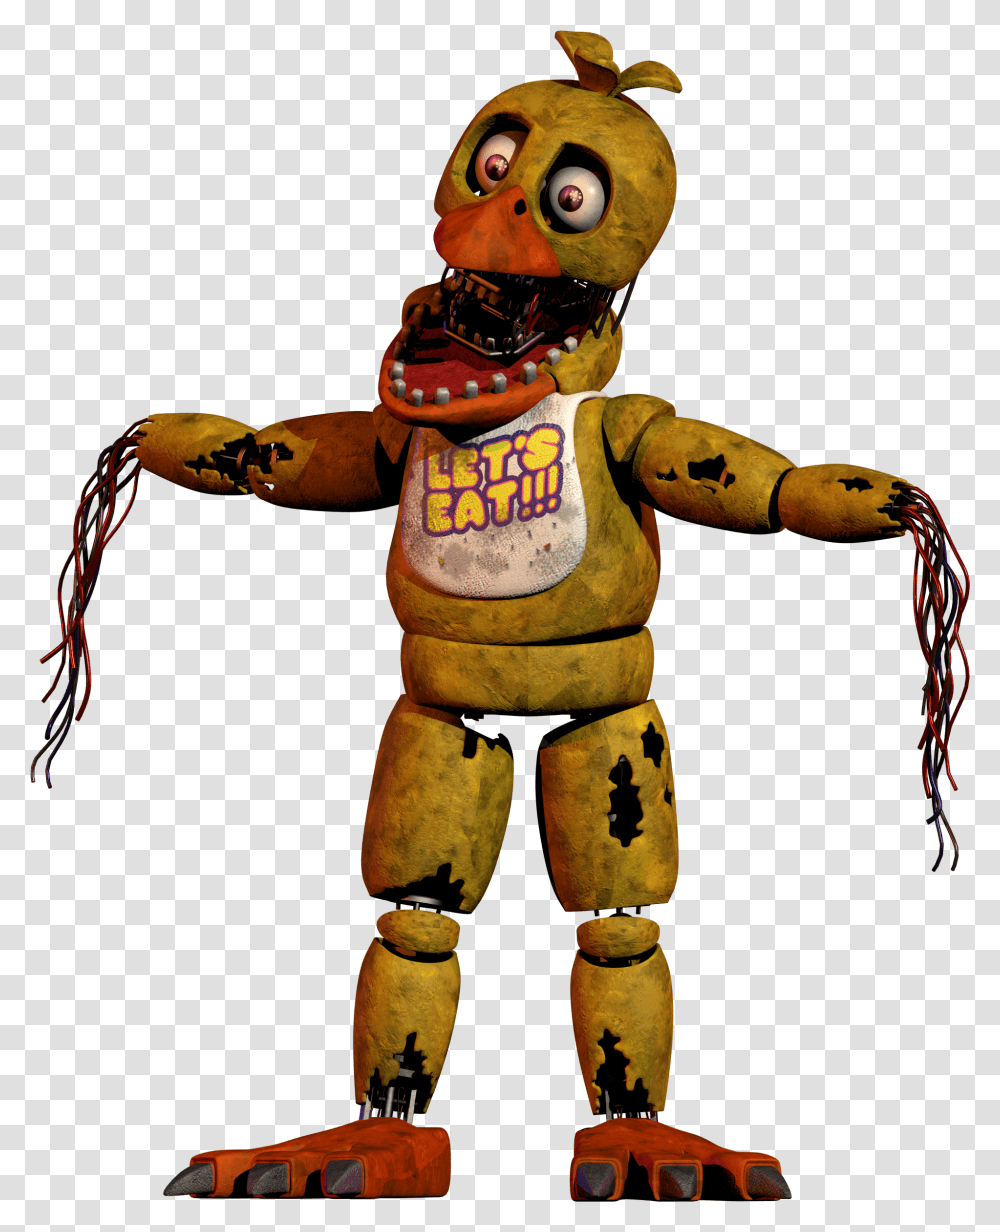 Fnaf Withered Chica Model, Toy, Architecture, Building, Emblem Transparent Png